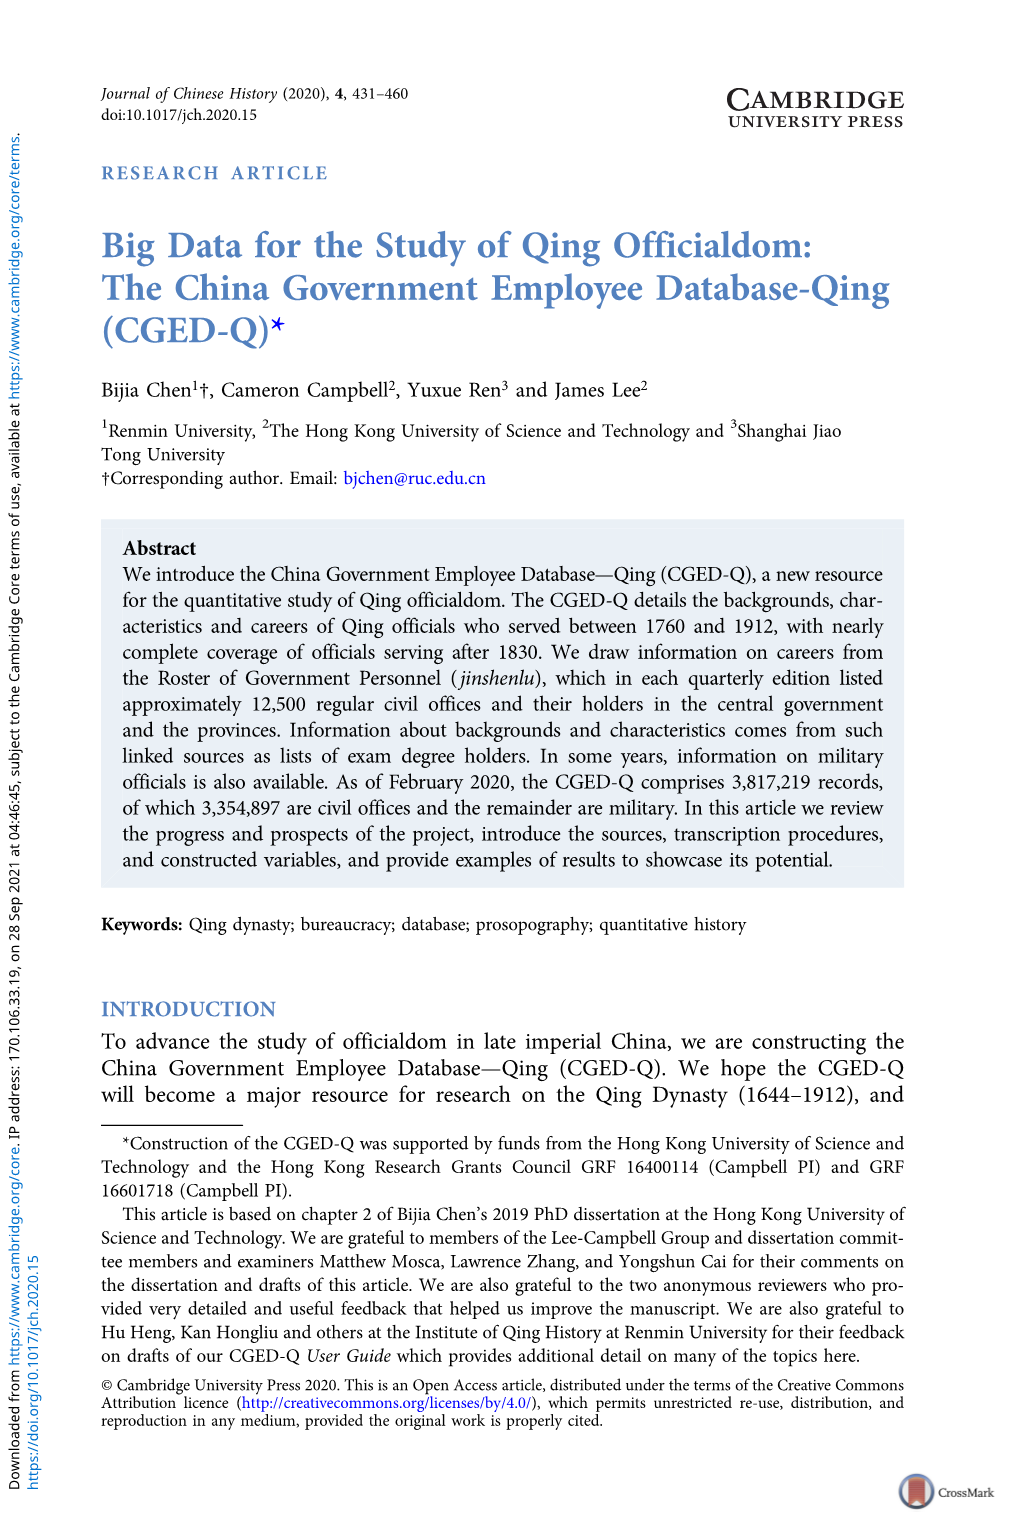 The China Government Employee Database-Qing (CGED-Q)*